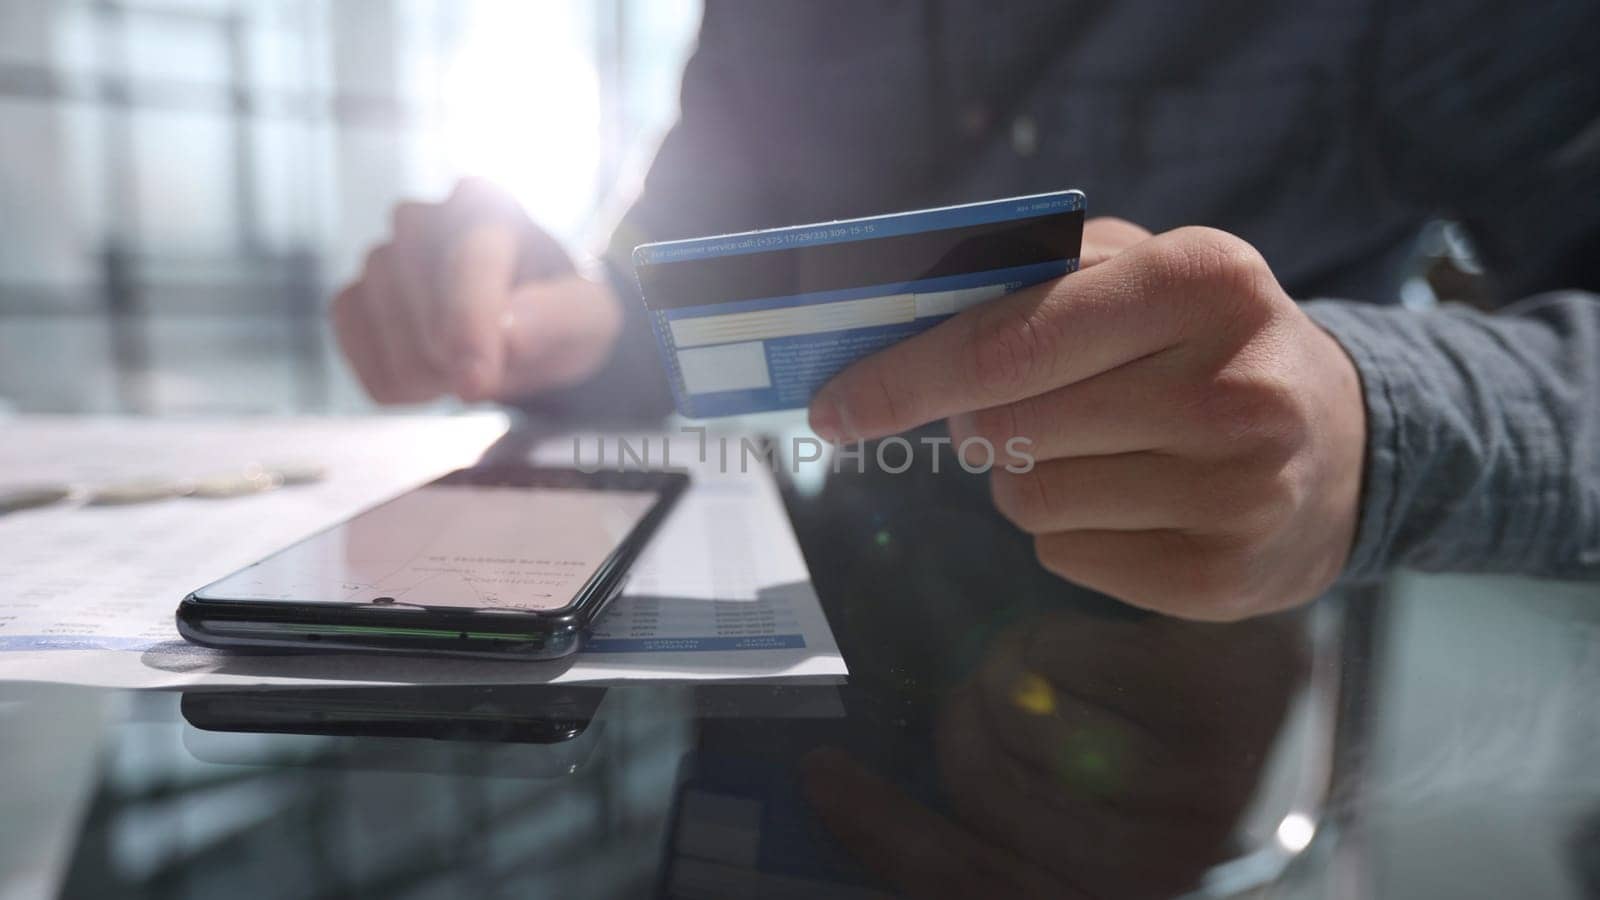 Entering data from the card on the phone for business payments by Prosto